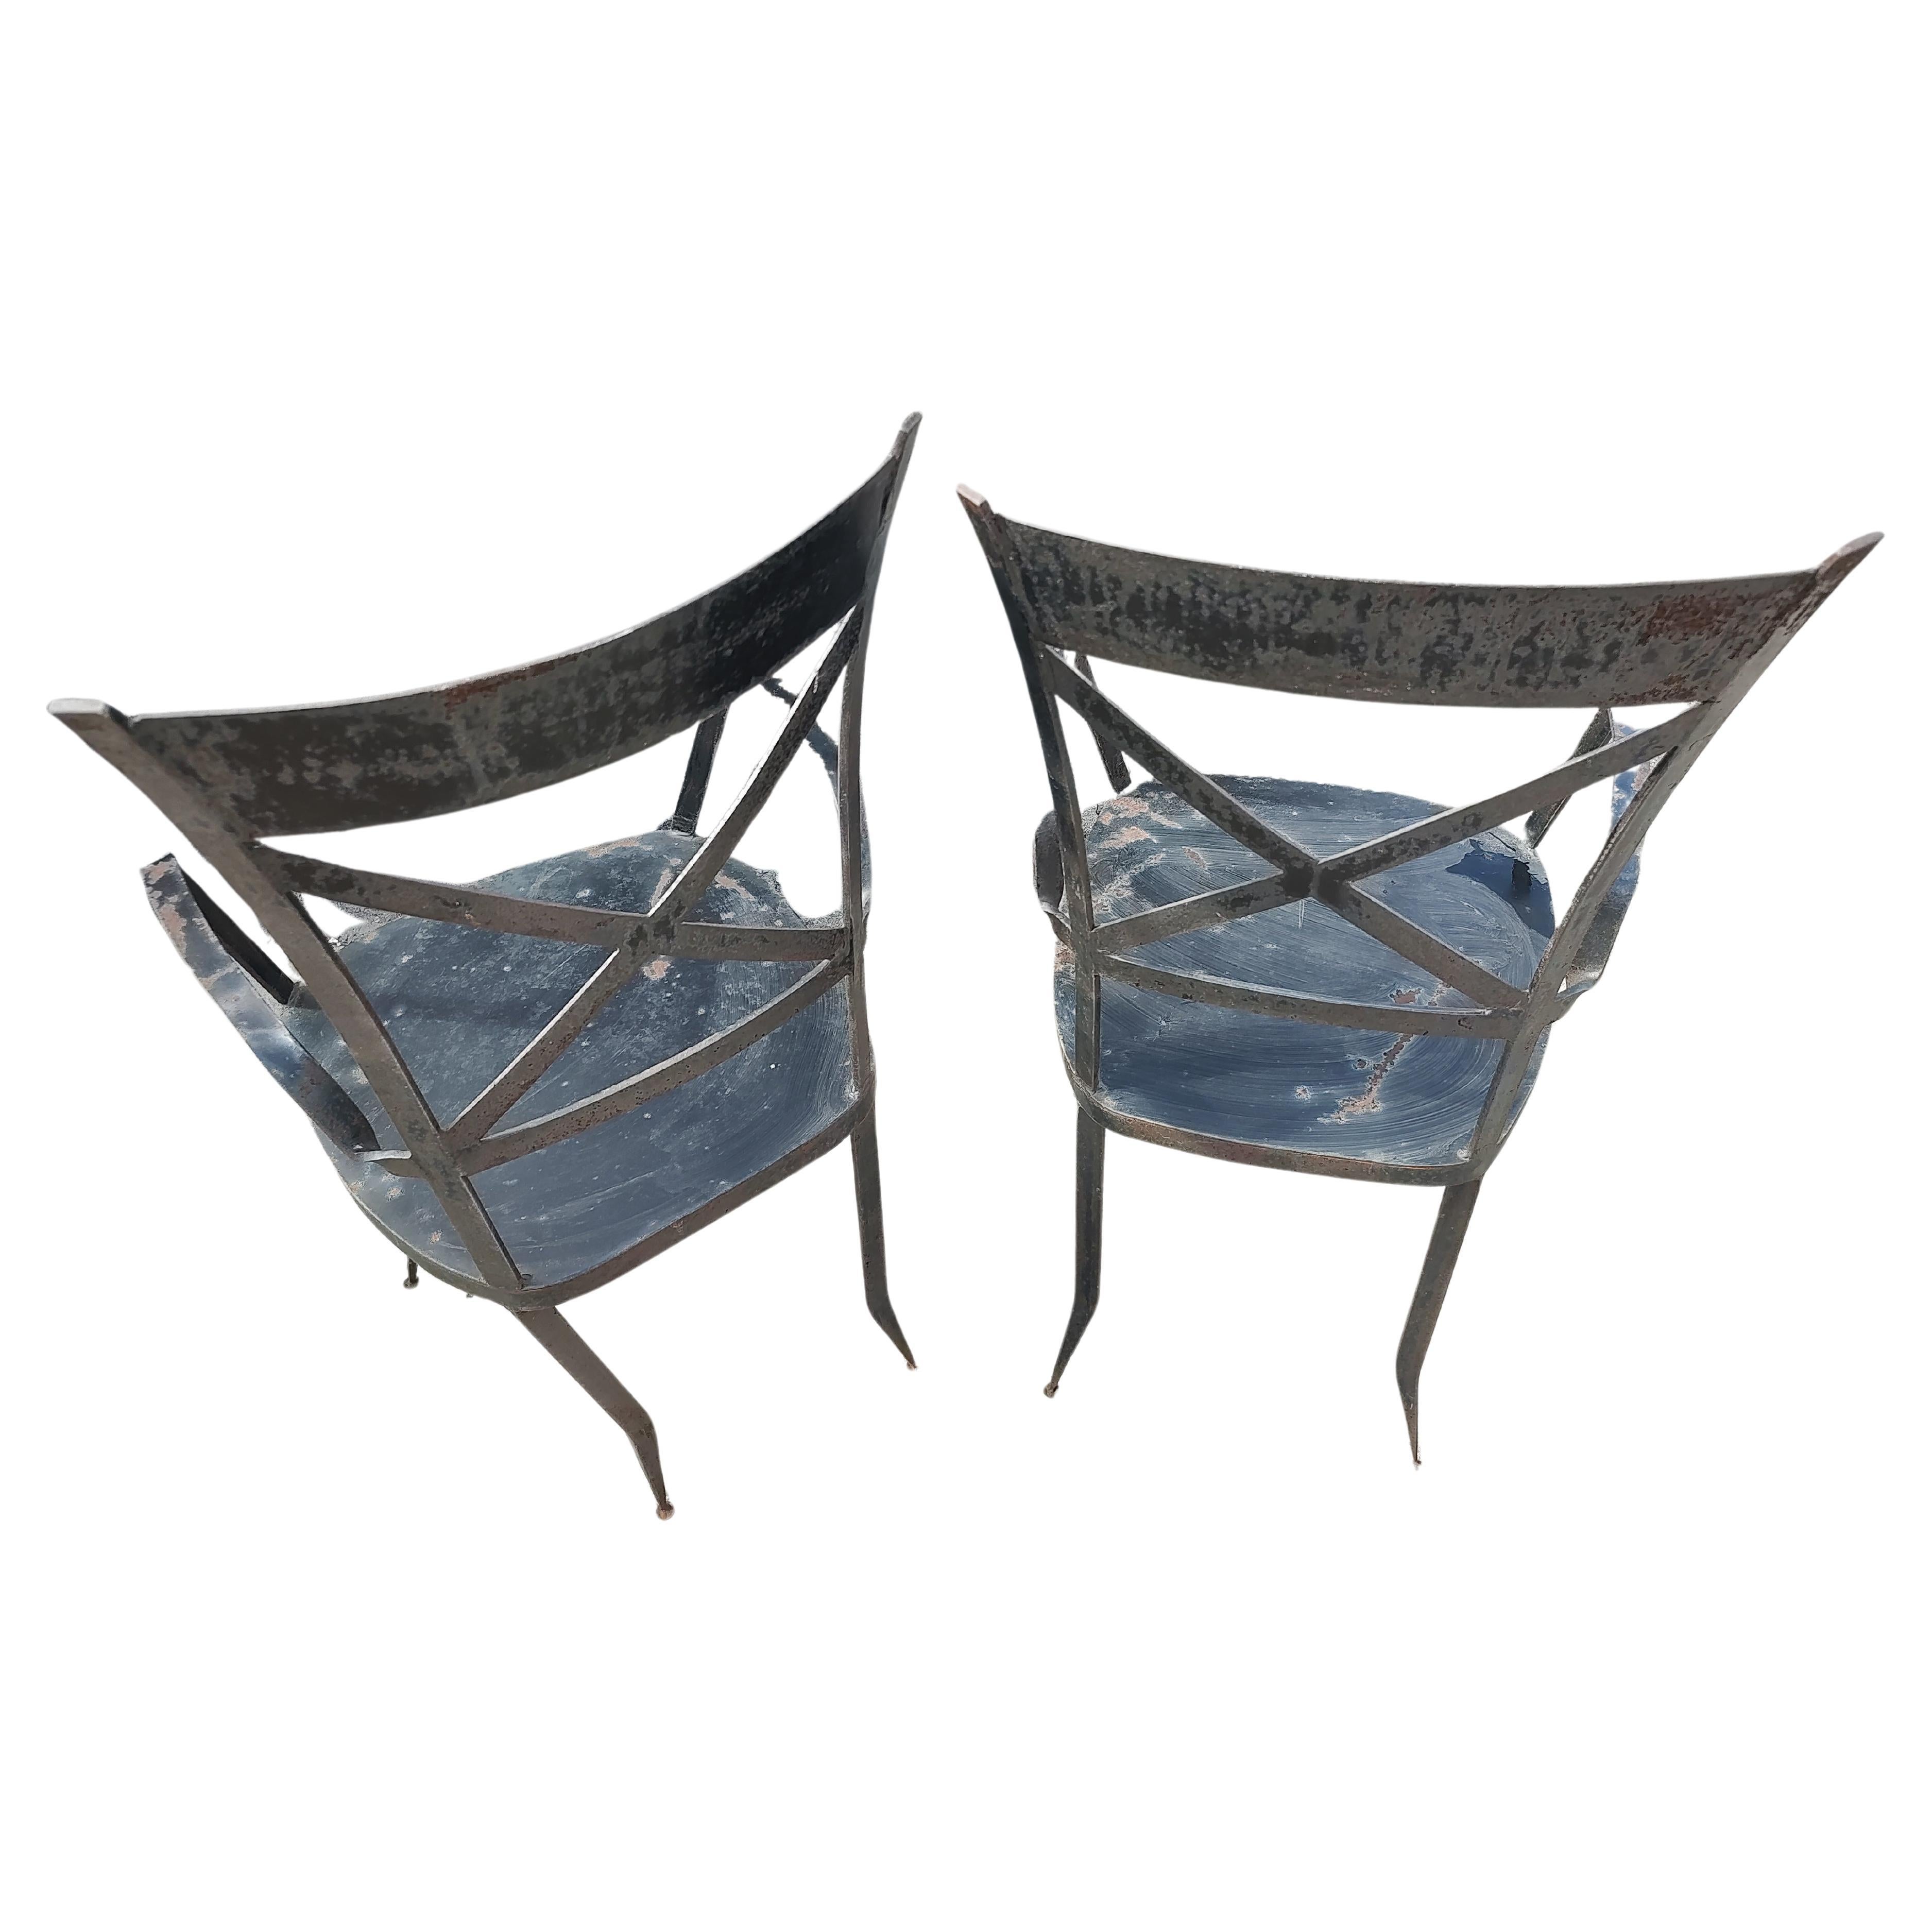 French Pair of Heavy Duty High Quality Iron Modern Sculptural Garden Patio Armchairs   For Sale